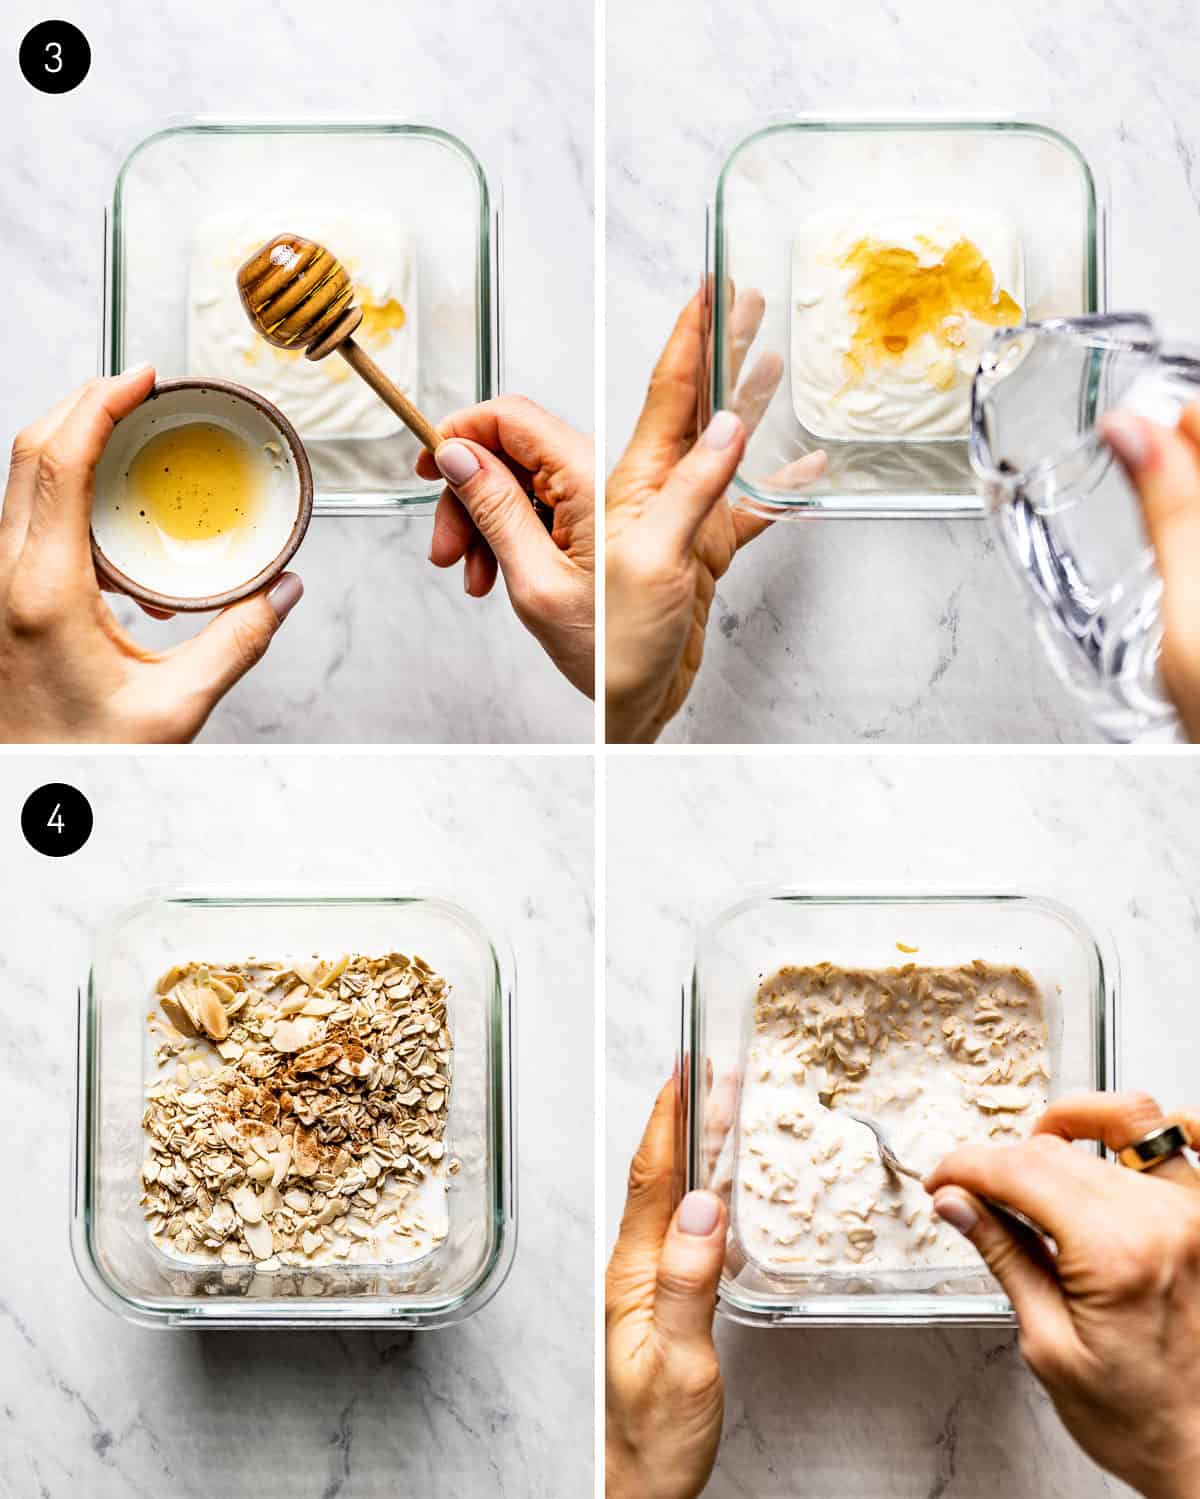 A person showing how to make overnight oats with yogurt from the top view.